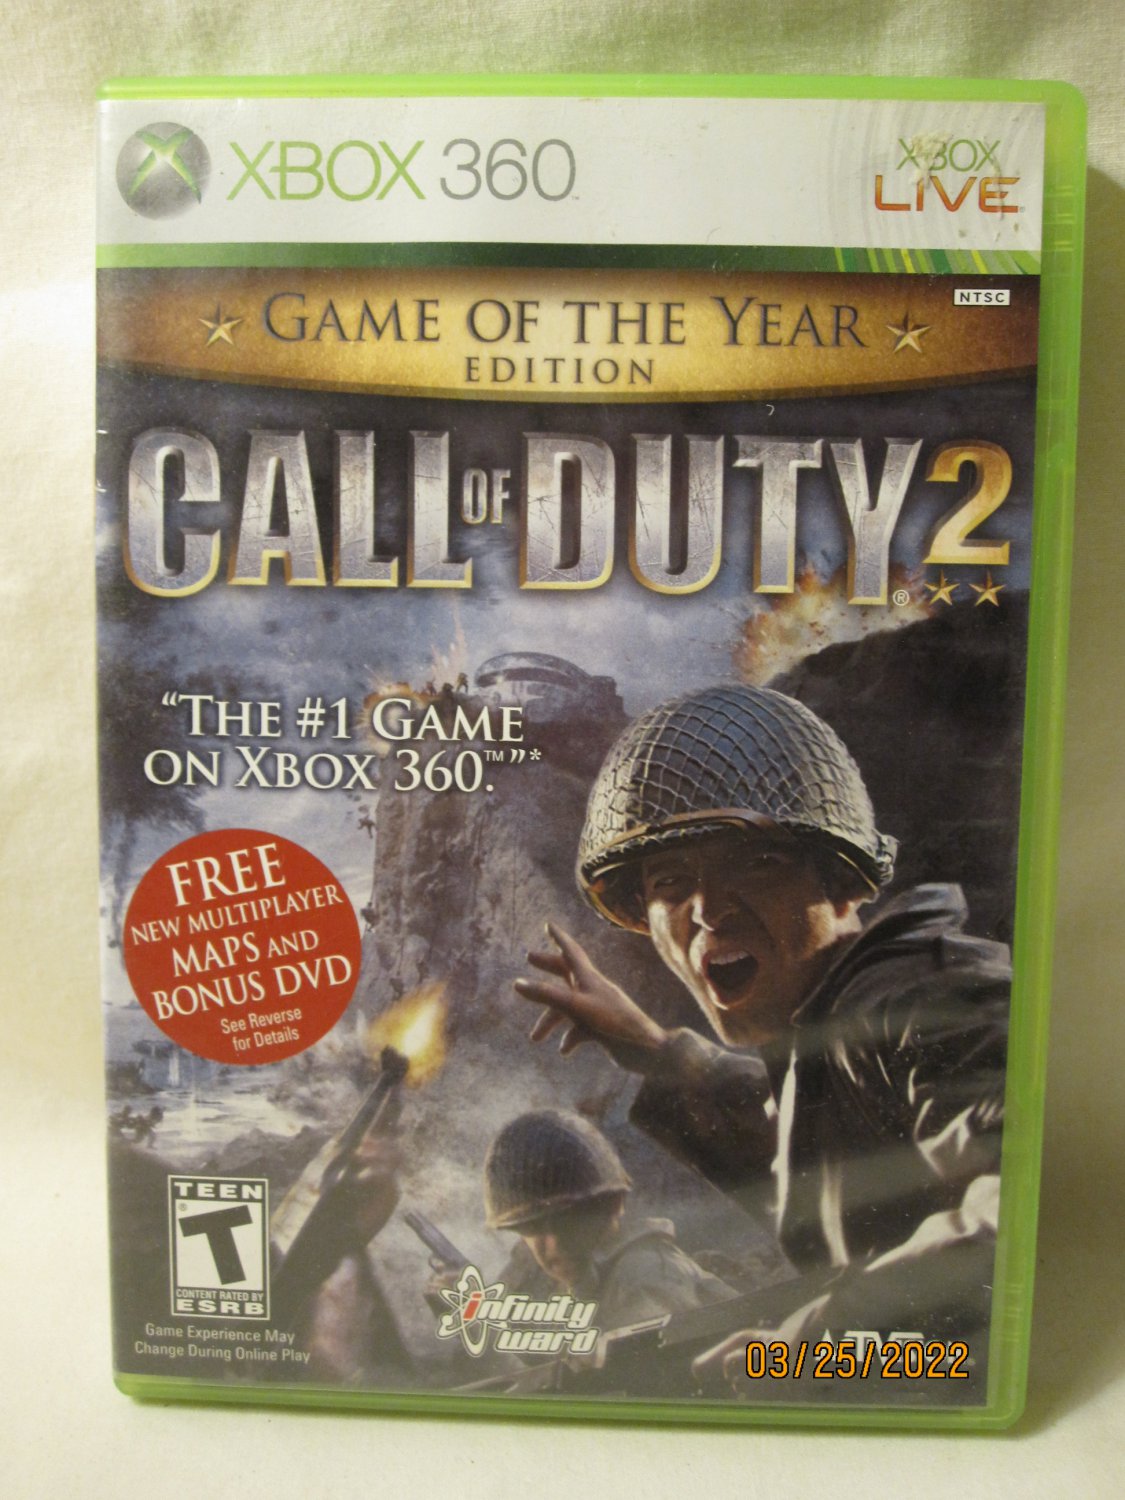 Xbox 360 Video Game: Call of Duty 2 - Game of the Year Ed. GOTY